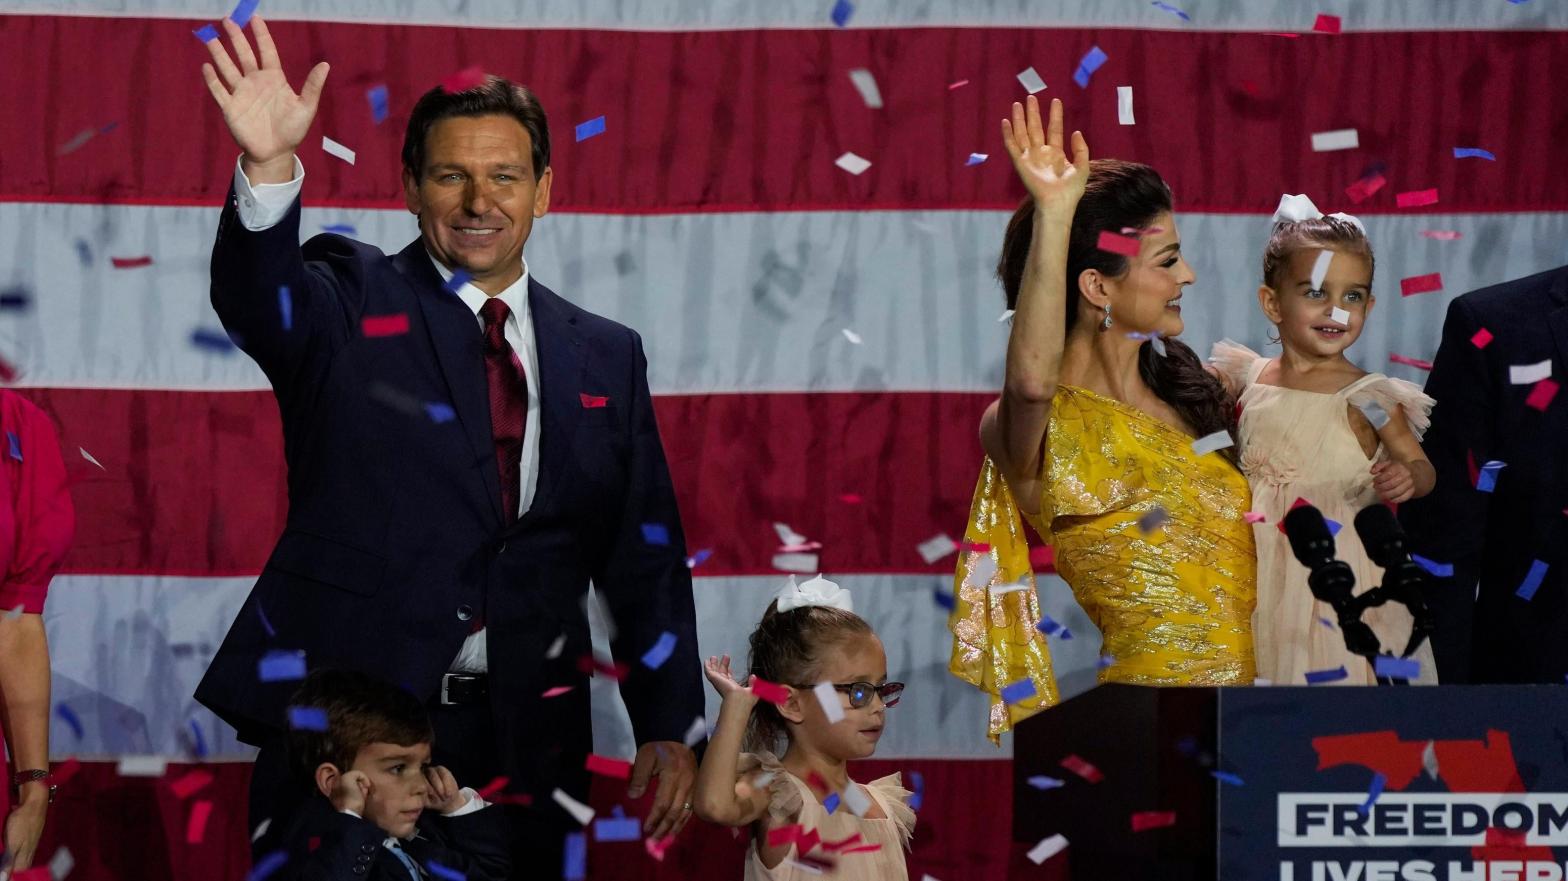 Ron DeSantis and his family after he won his bid for reelection Tuesday. (Photo: Rebecca Blackwell, AP)